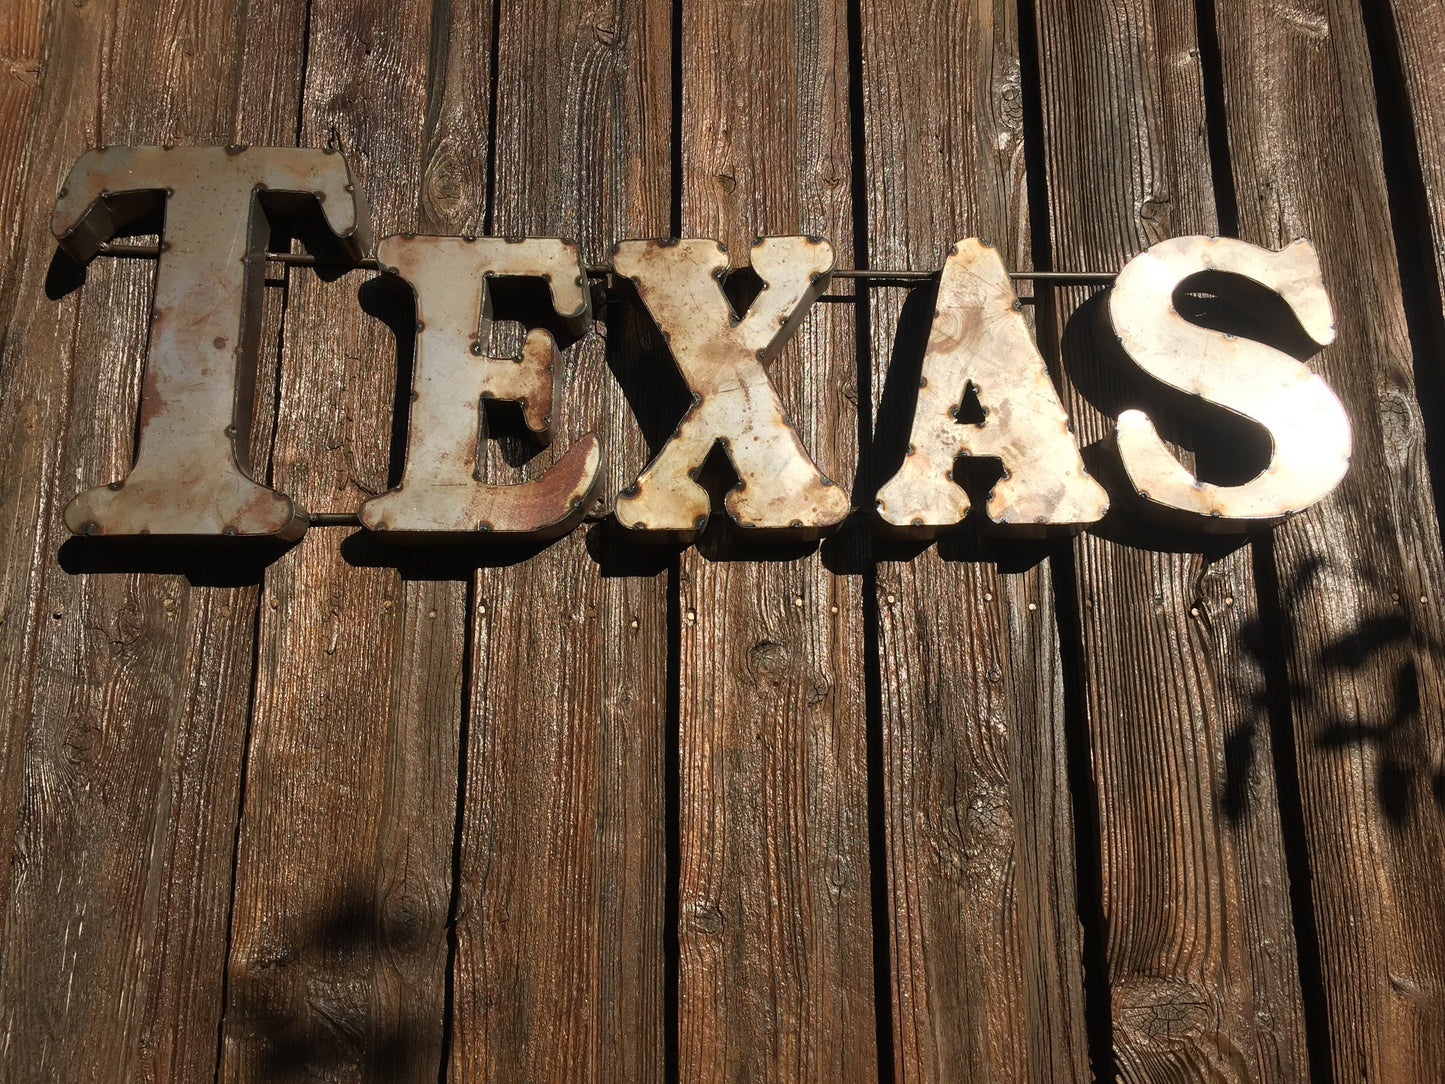 TEXAS RUSTIC RECYCLED METAL WALL DECOR